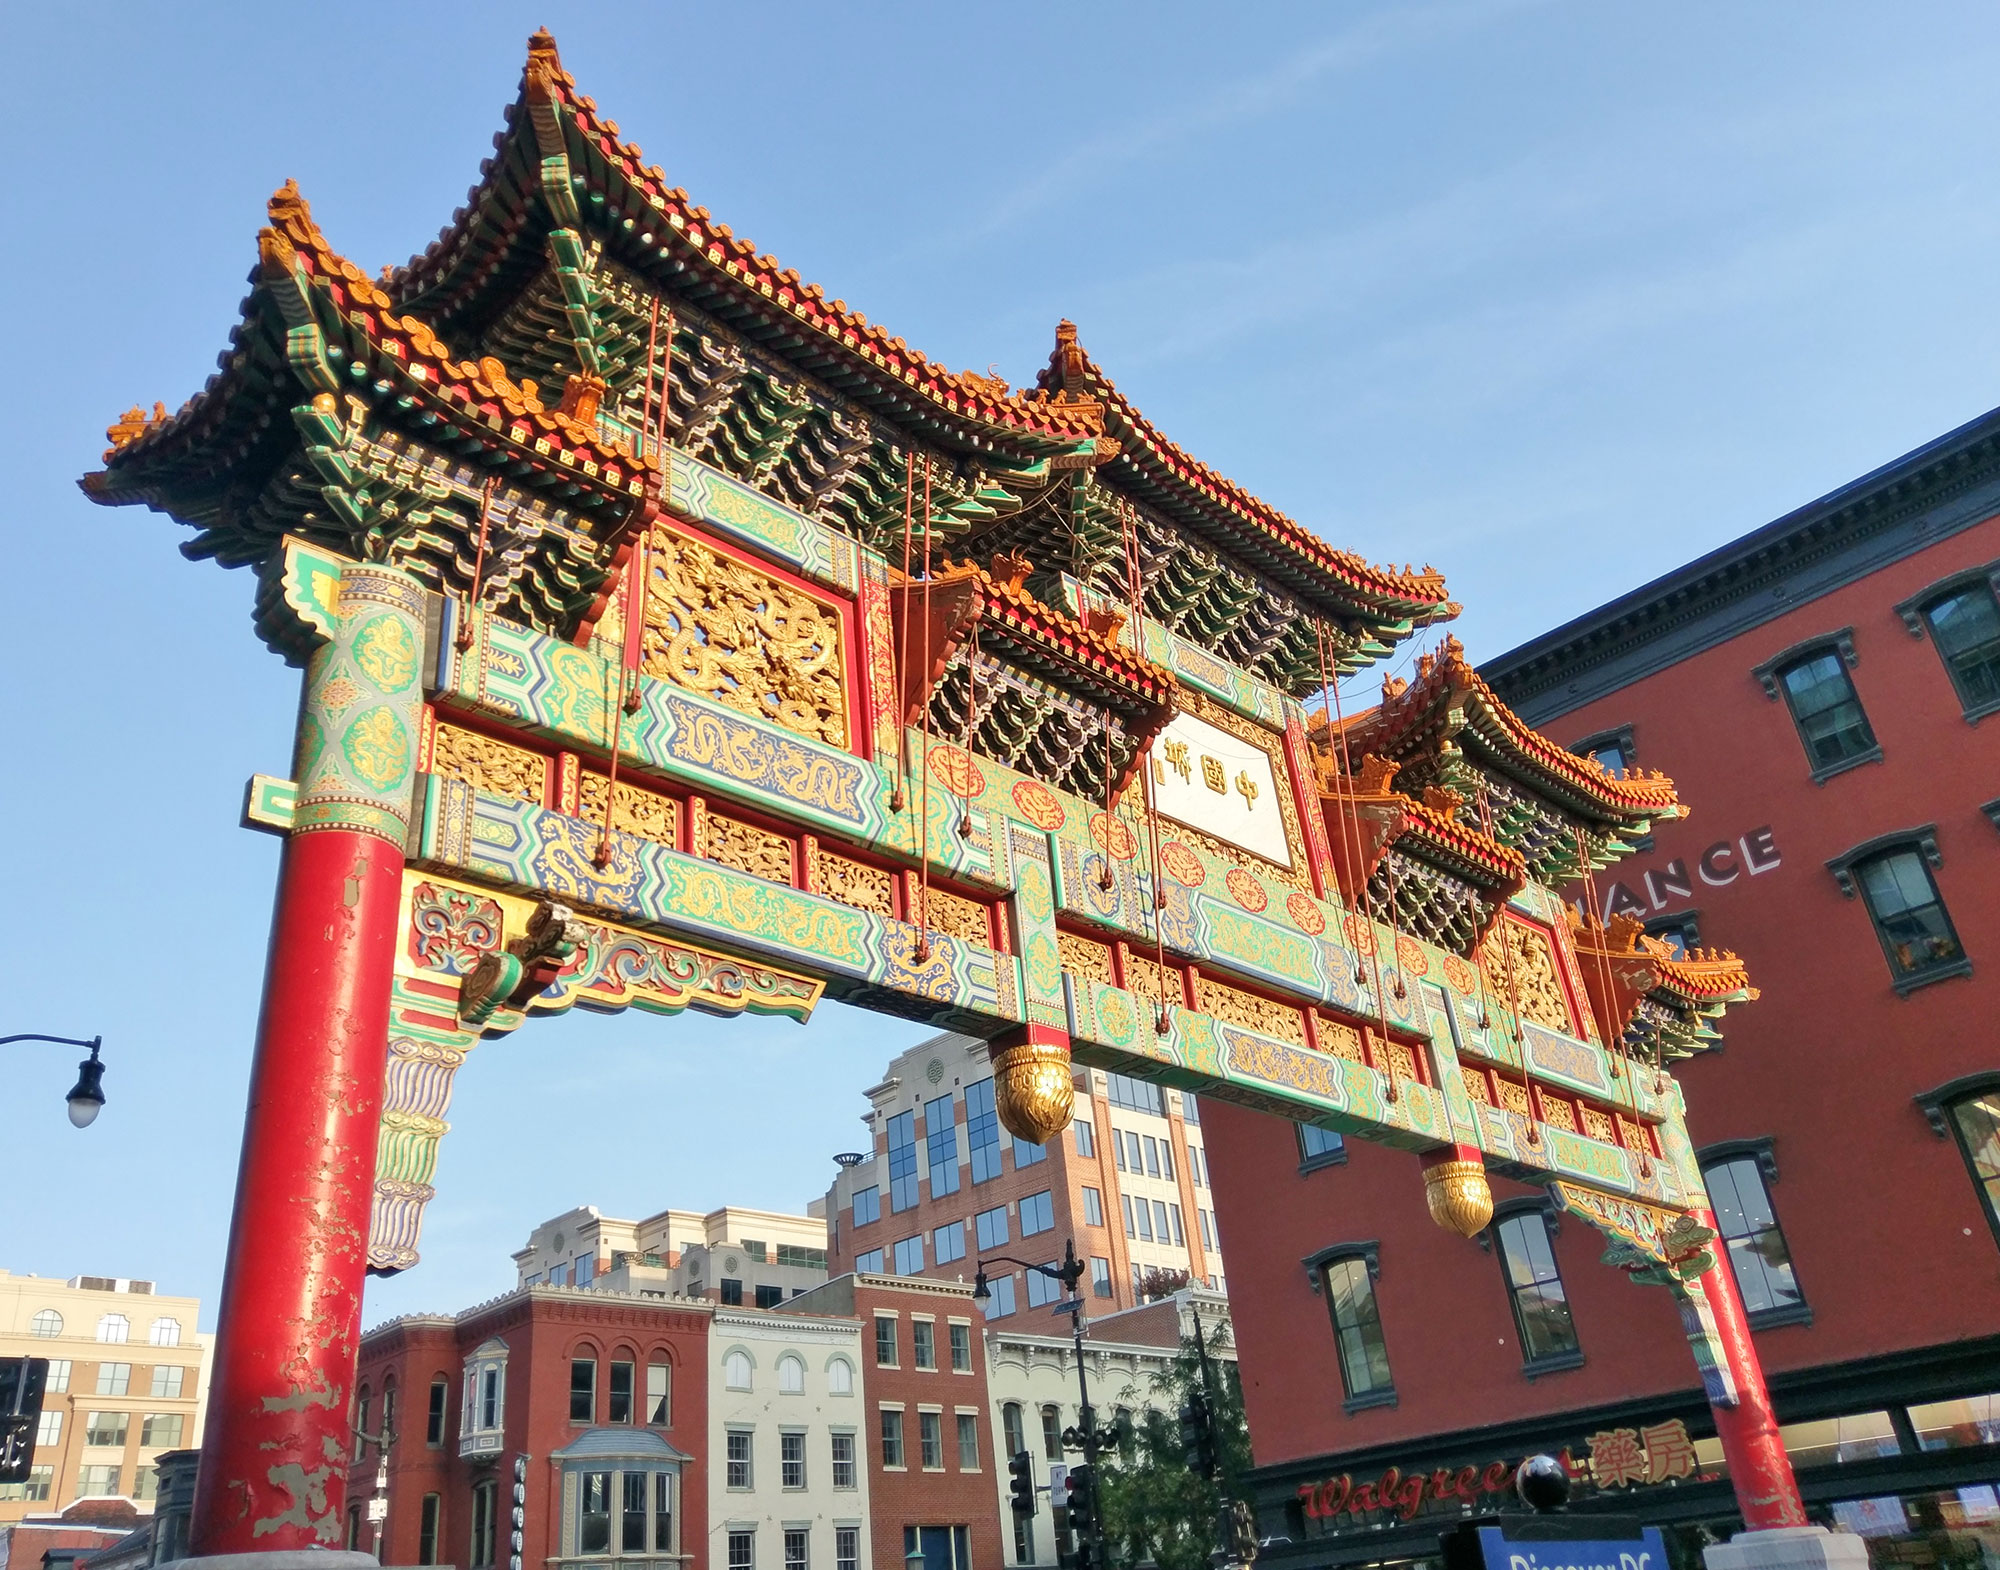 The archway in Chinatown, Washington D.C.